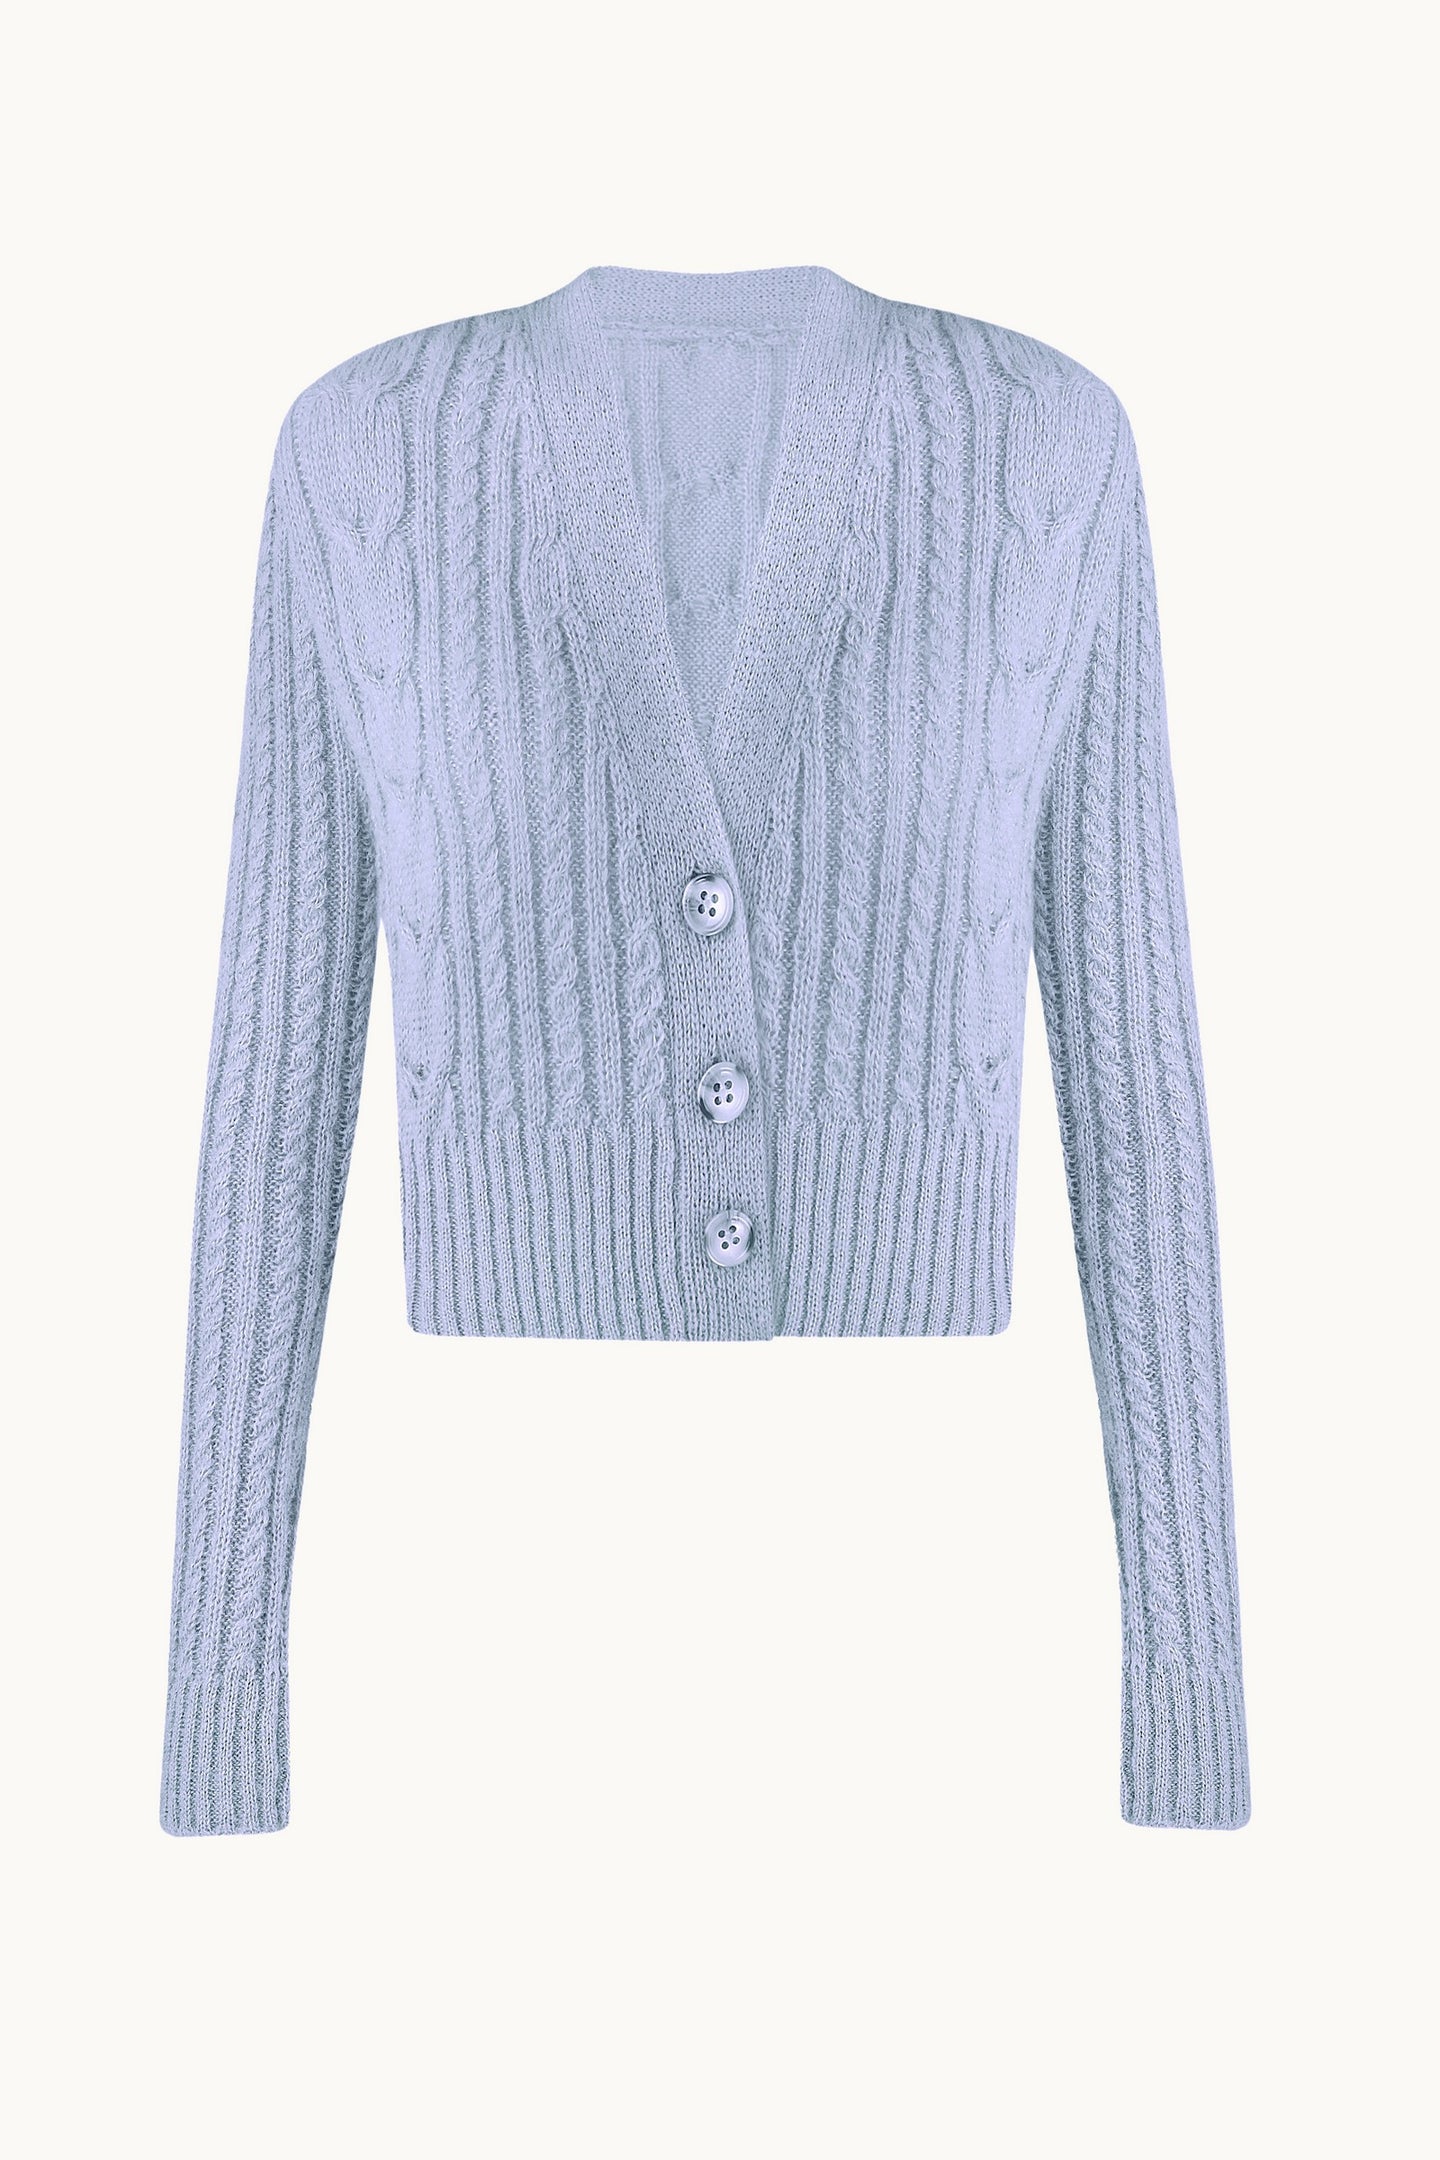 Toma sky blue cardigan front view